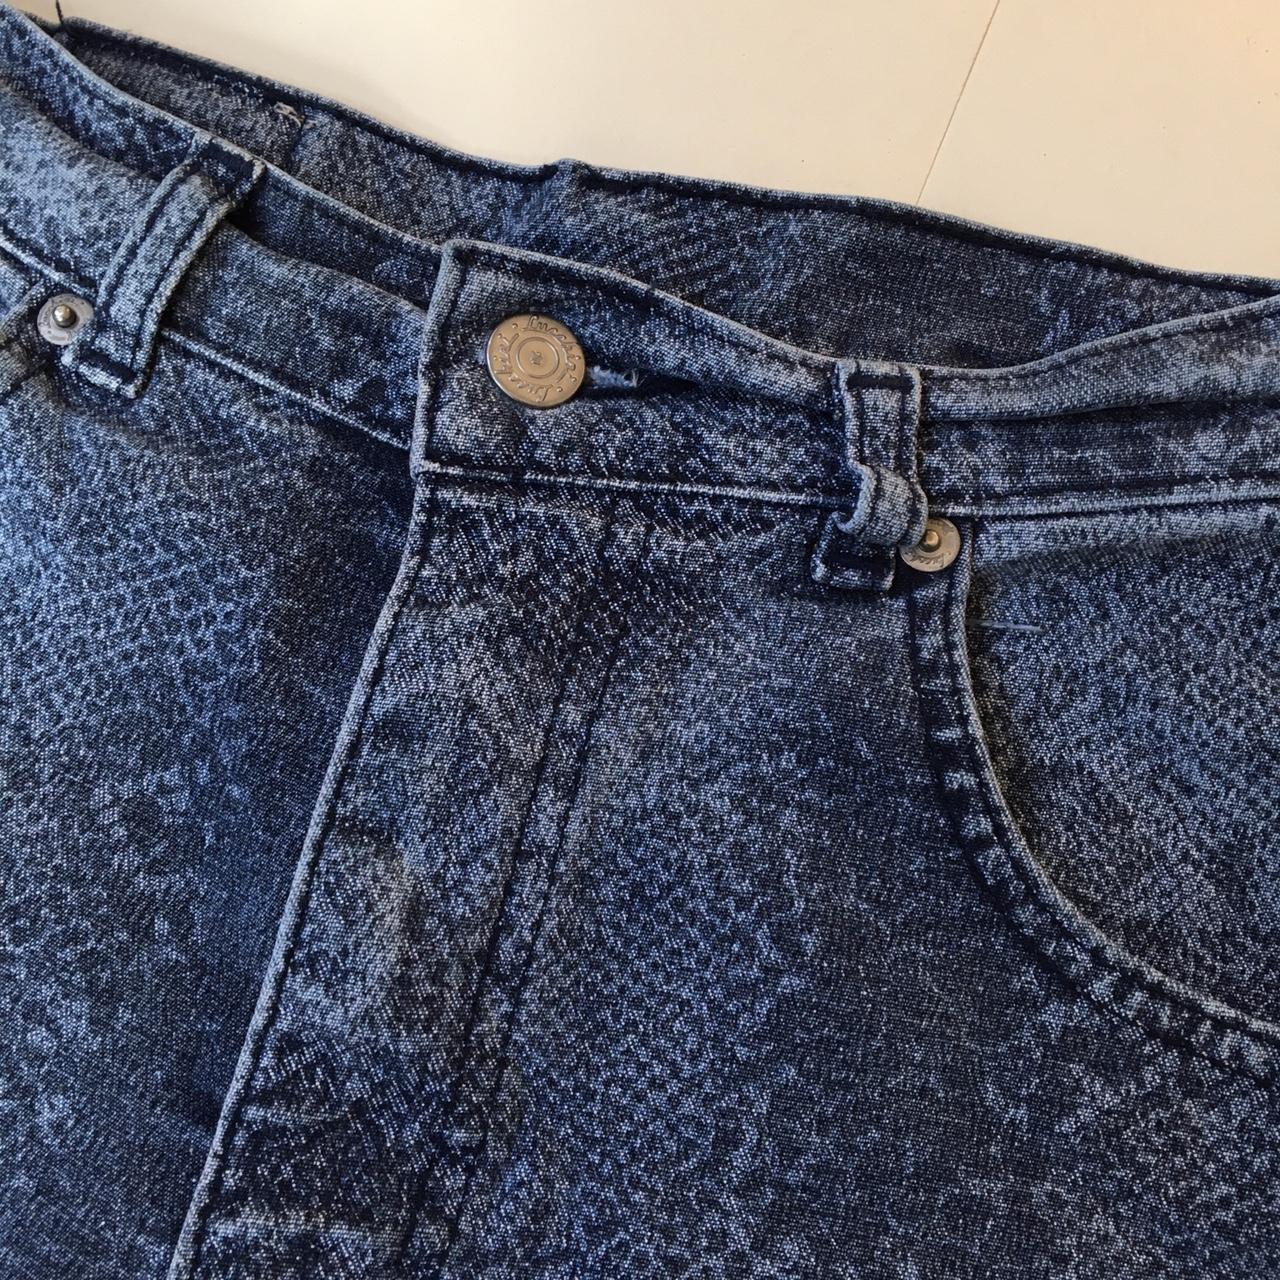 Lucchini 90s high rise blue denim jeans with... - Depop